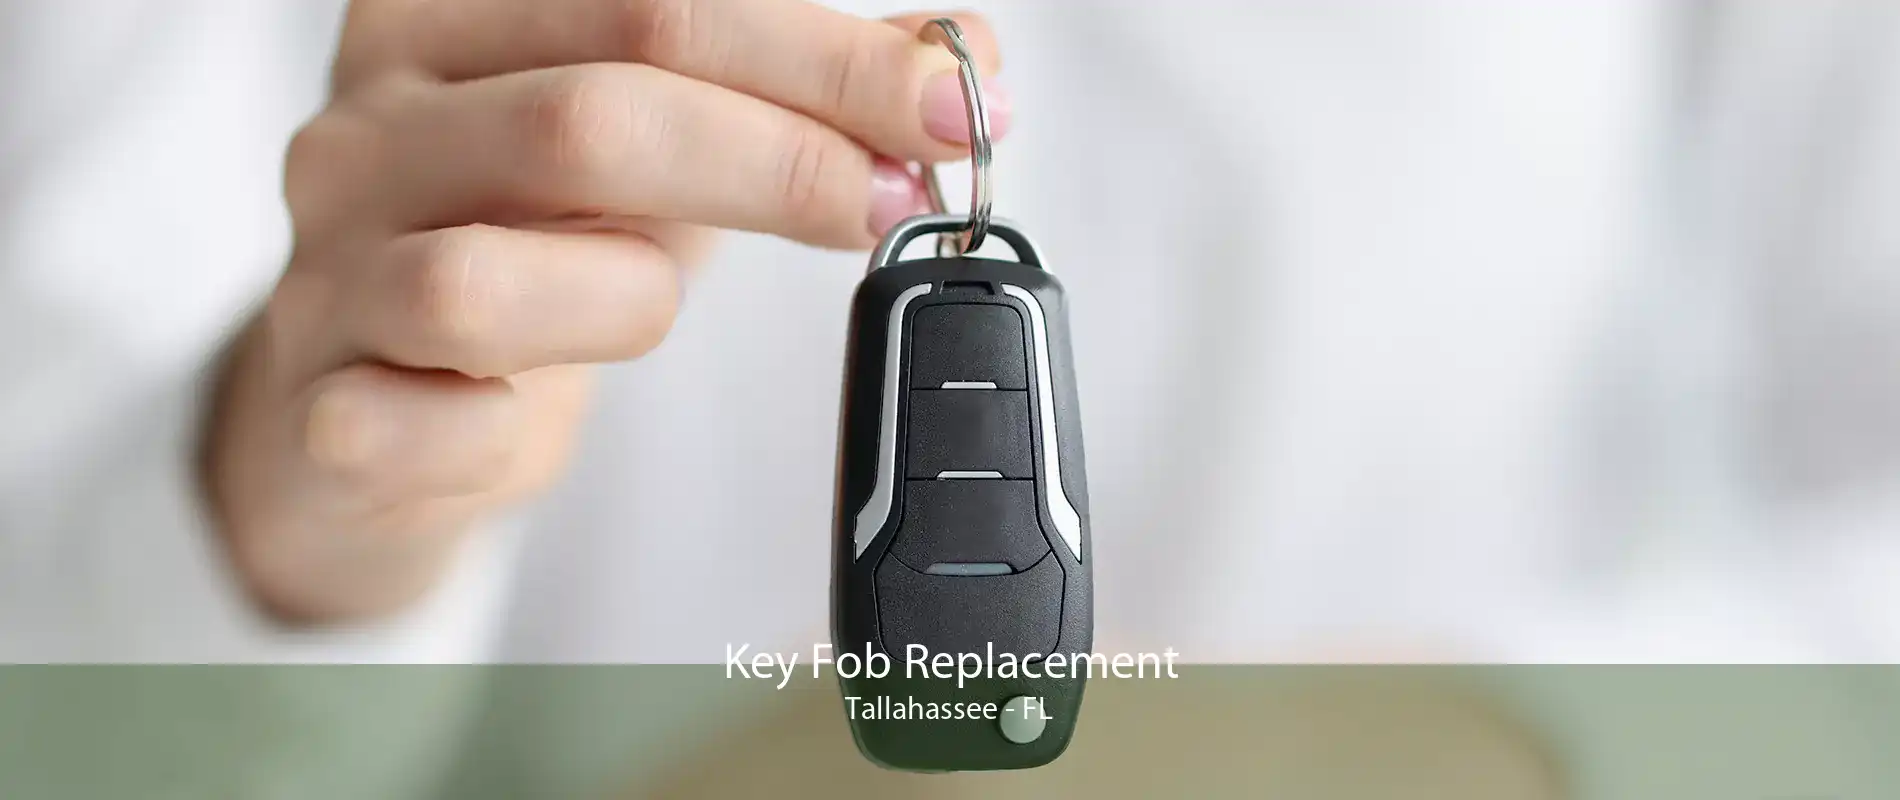 Key Fob Replacement Tallahassee - FL